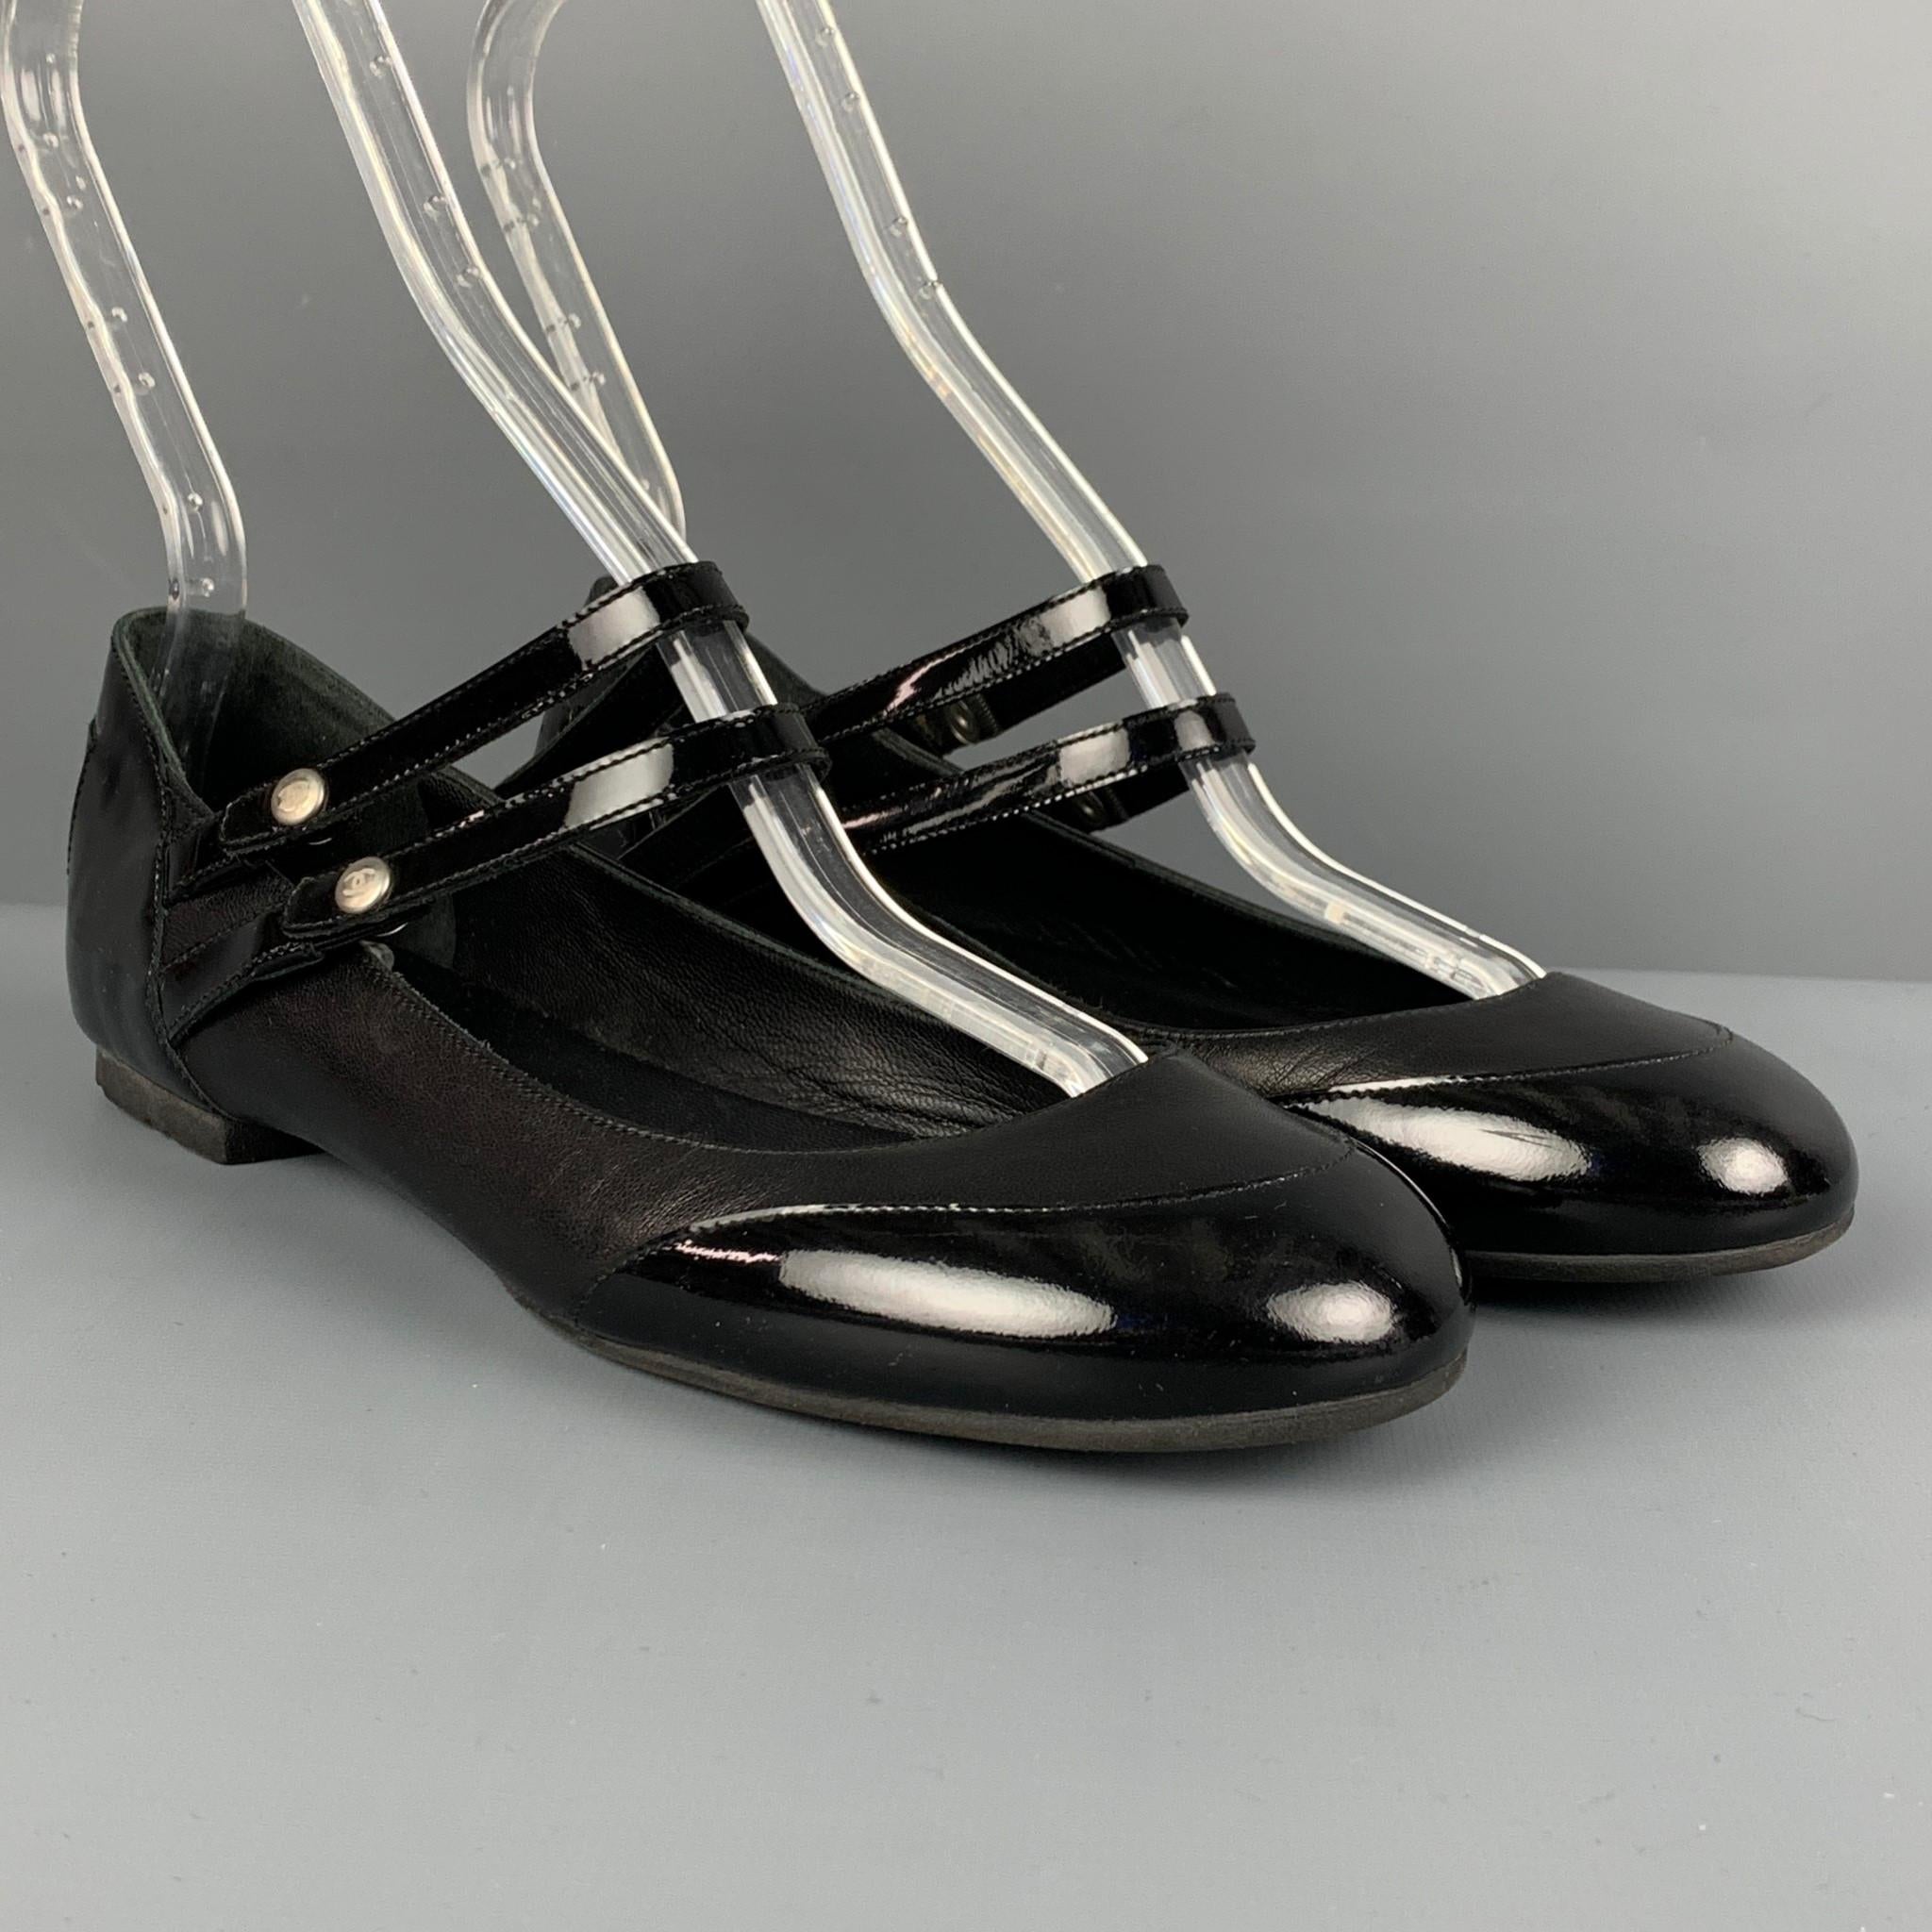 Chanel Patent Mary Janes - For Sale on 1stDibs  chanel mary jane shoes, mary  jane chanel, chanel mary janes flats